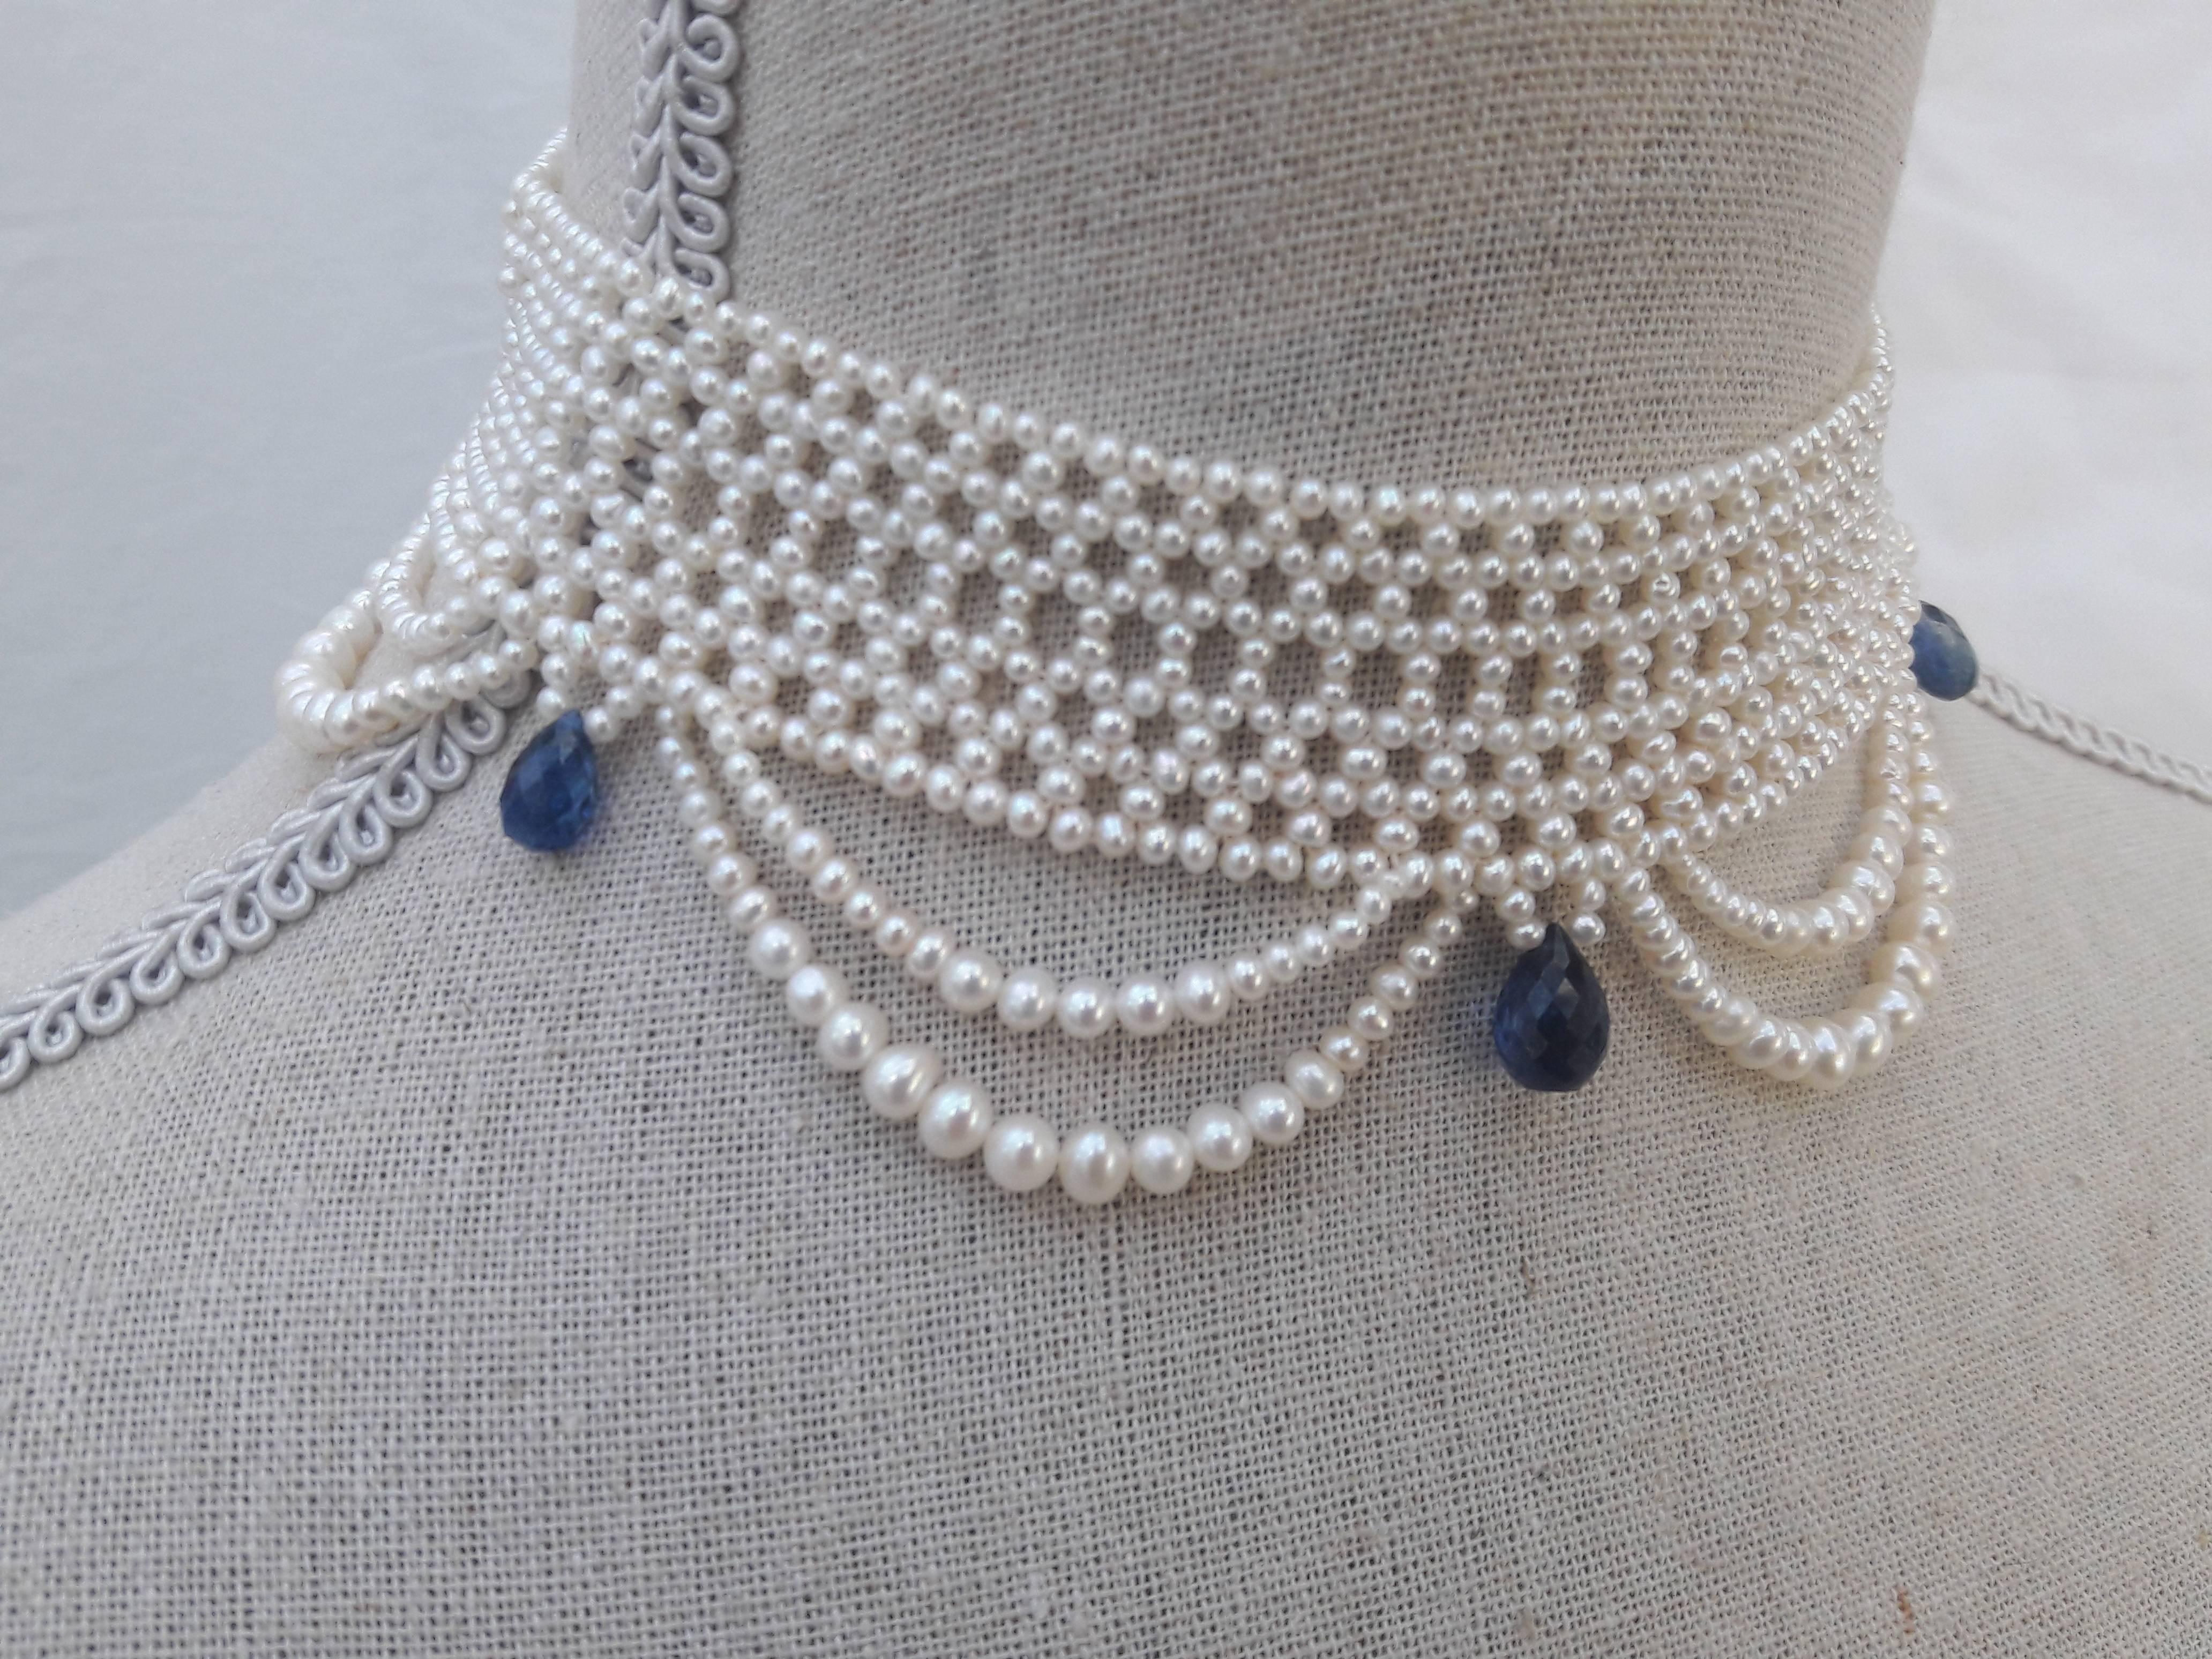 2.5 - 3 mm cultured pearls are intricately hand woven to create a delicate lace-like design. Choker is tapered in design to fit along the curve of the neckline. Clasp is made of 14 K yellow gold plate over sterling silver, and slides very smoothly